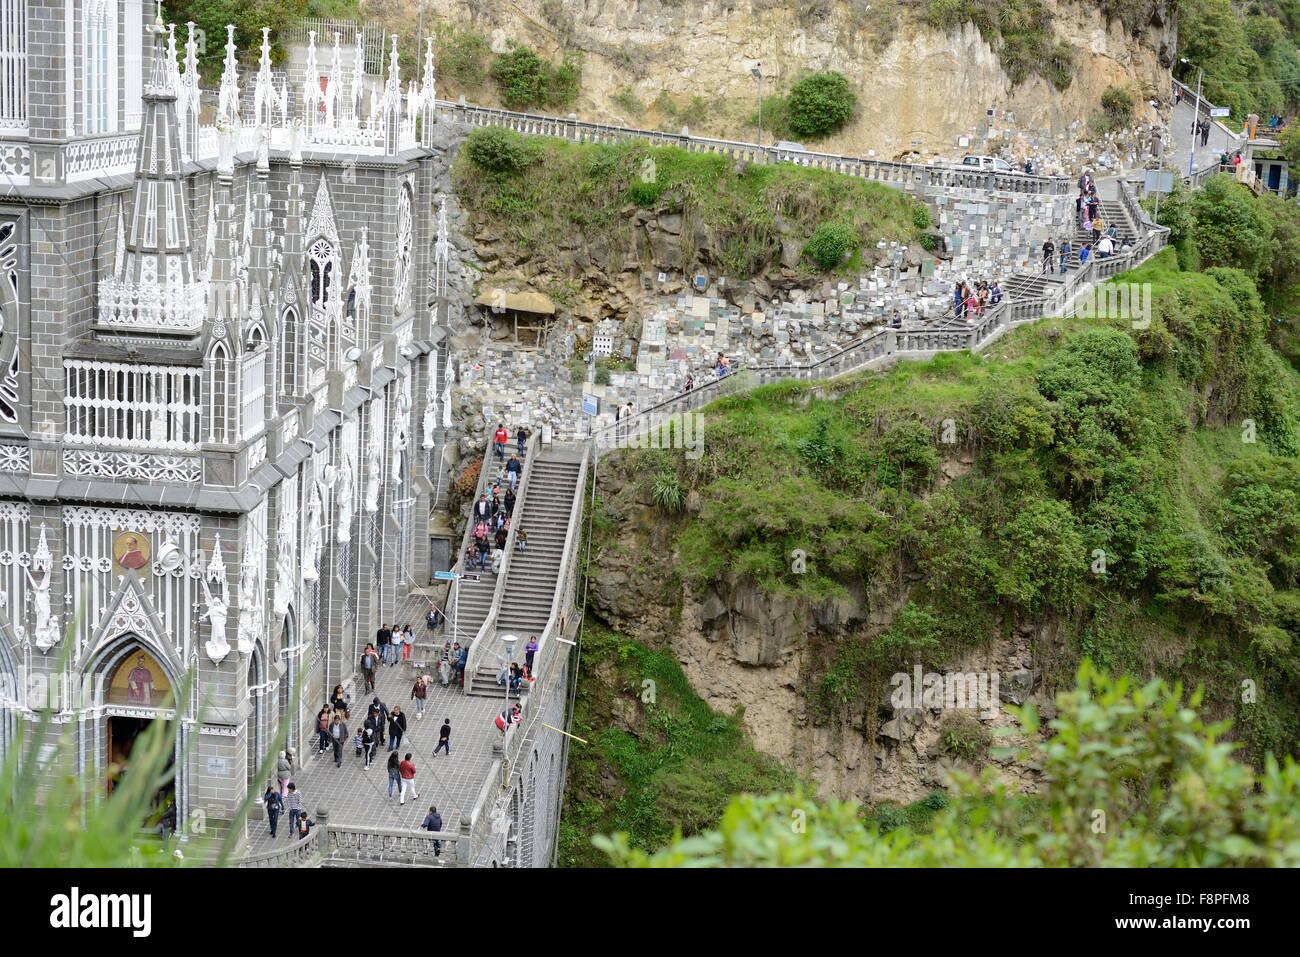 Las Lajas - gothic church in Colombia. Stock Photo